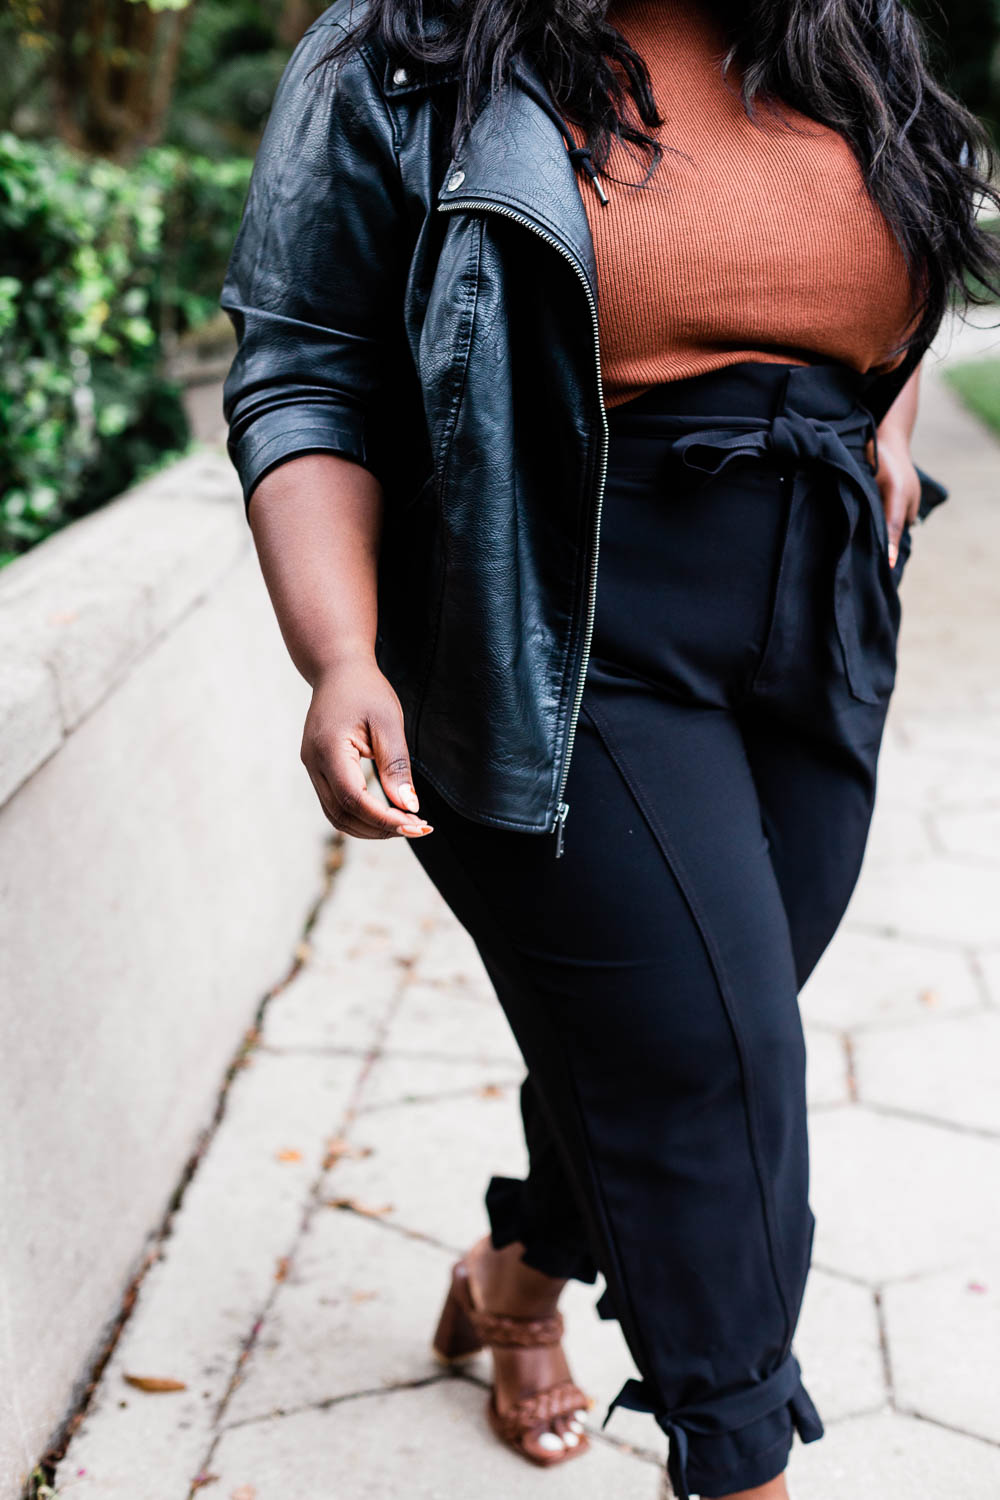 THAMARR, MUSINGS OF A CURVY LADY, JCPENNEY, LEVI'S, MOTO JACKET, PLUS SIZE MOTO, FALL FASHION, PLUS SIZE FALL OUTFIT